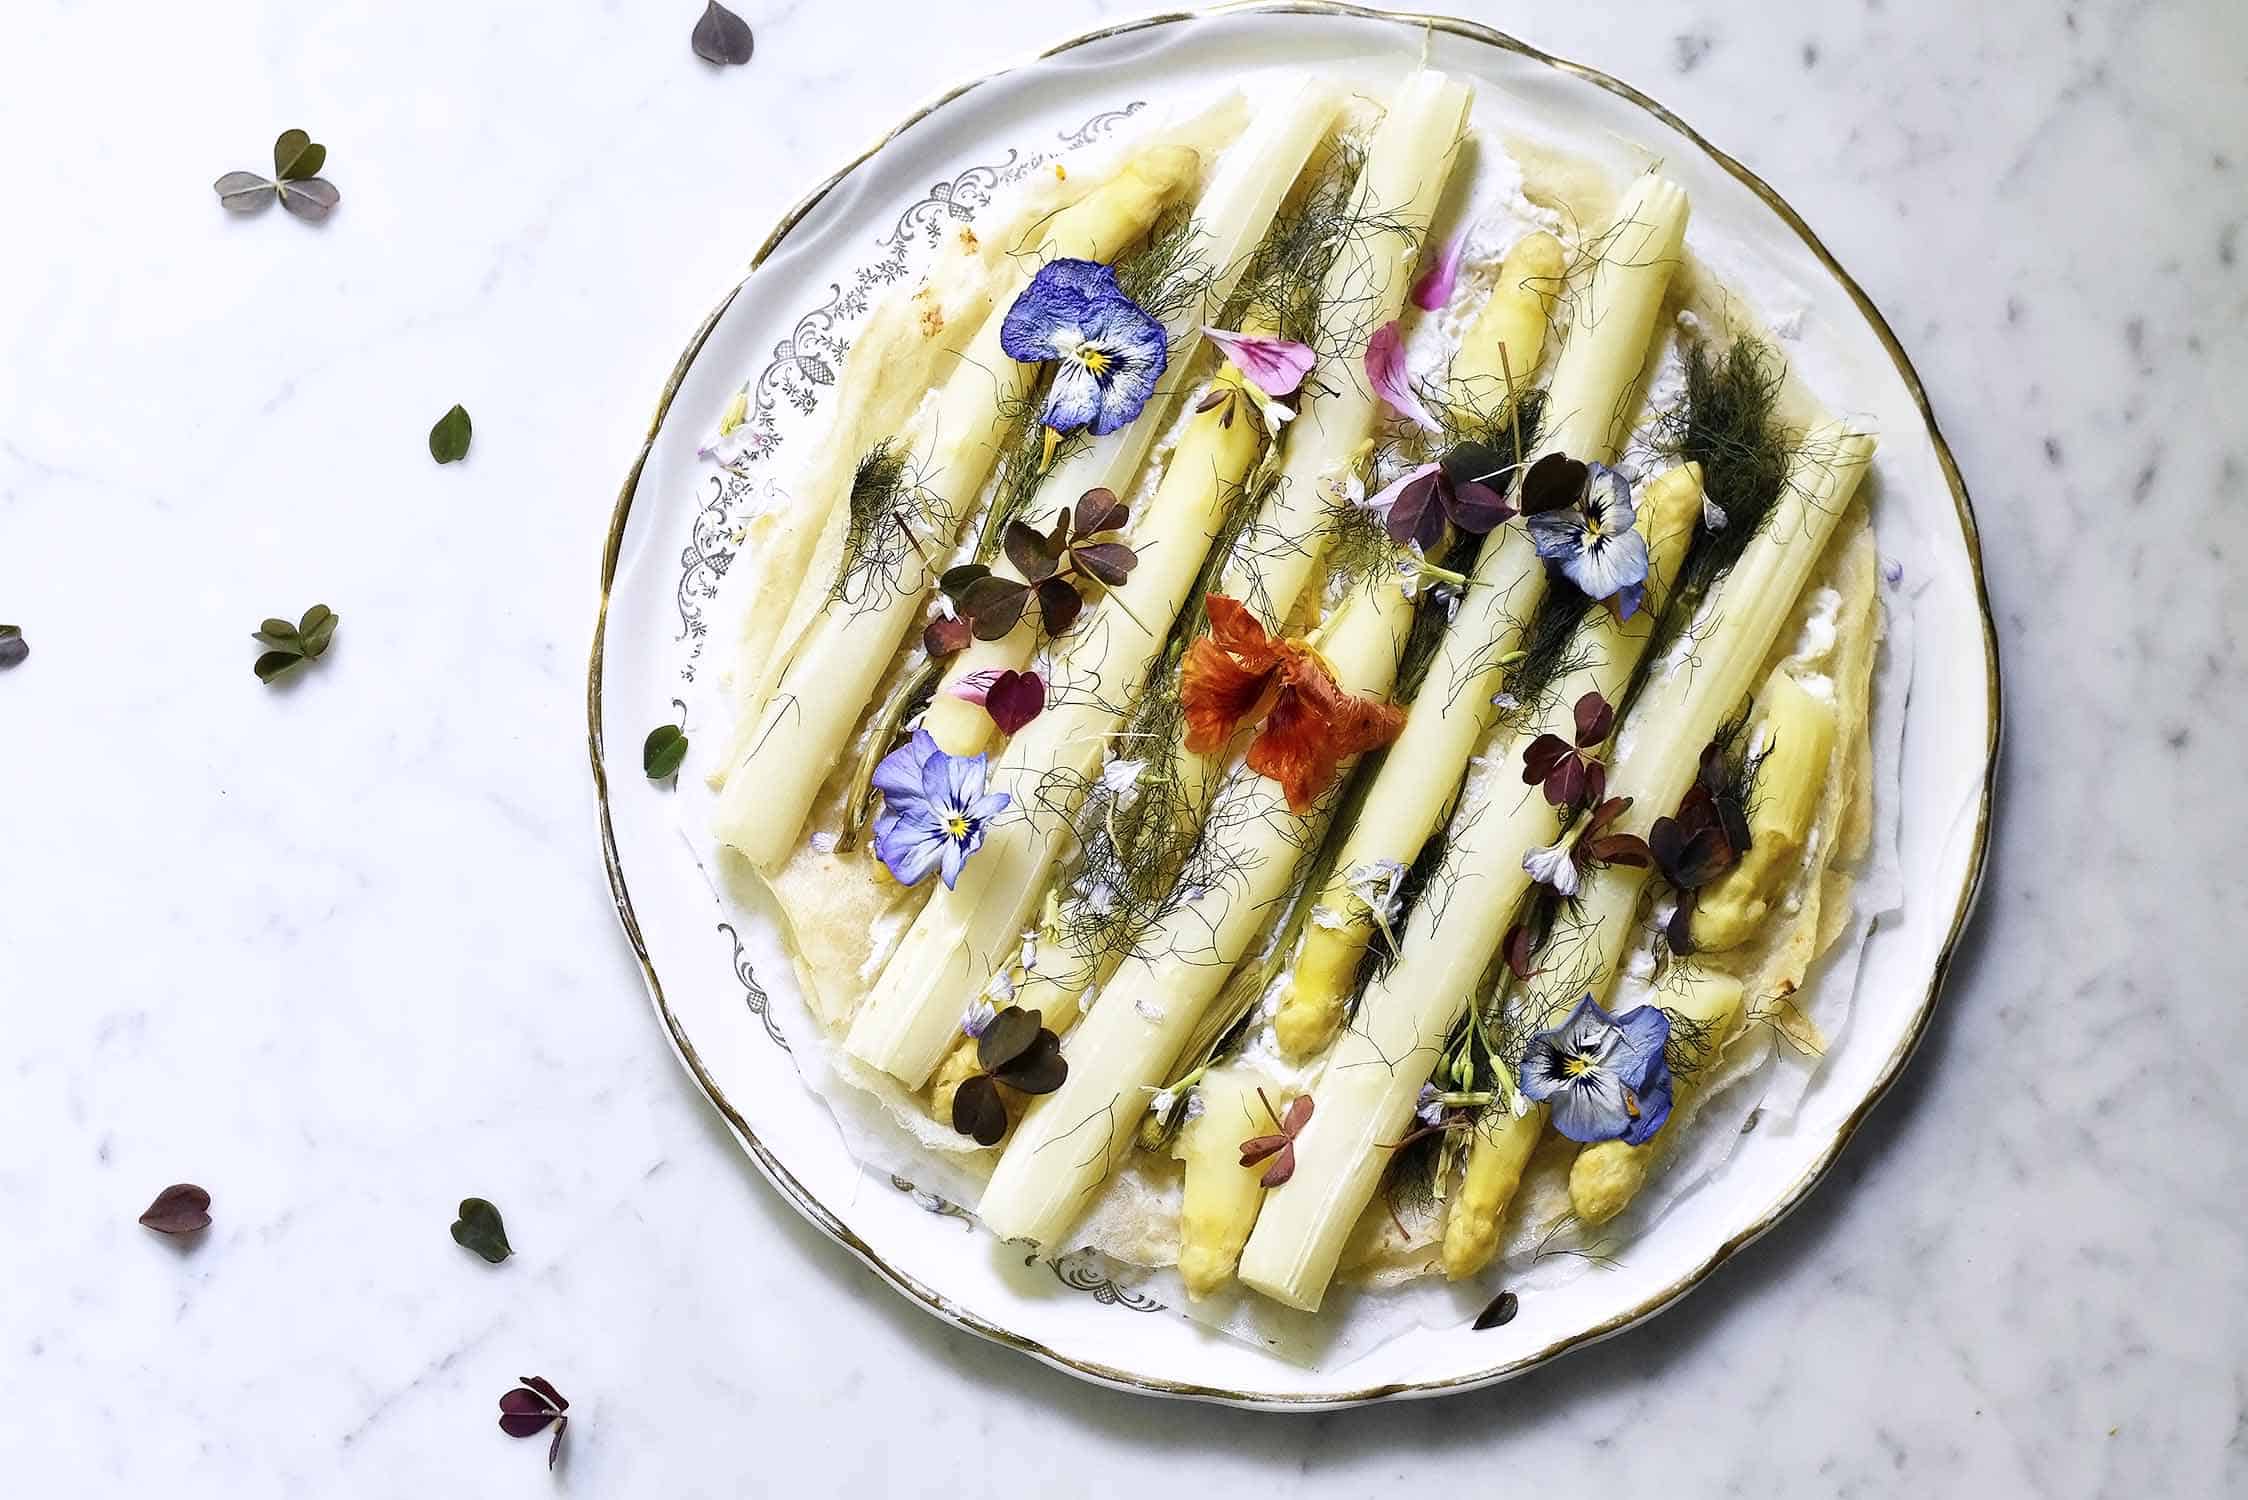 My Spring floral lunch in the garden serving white asparagus